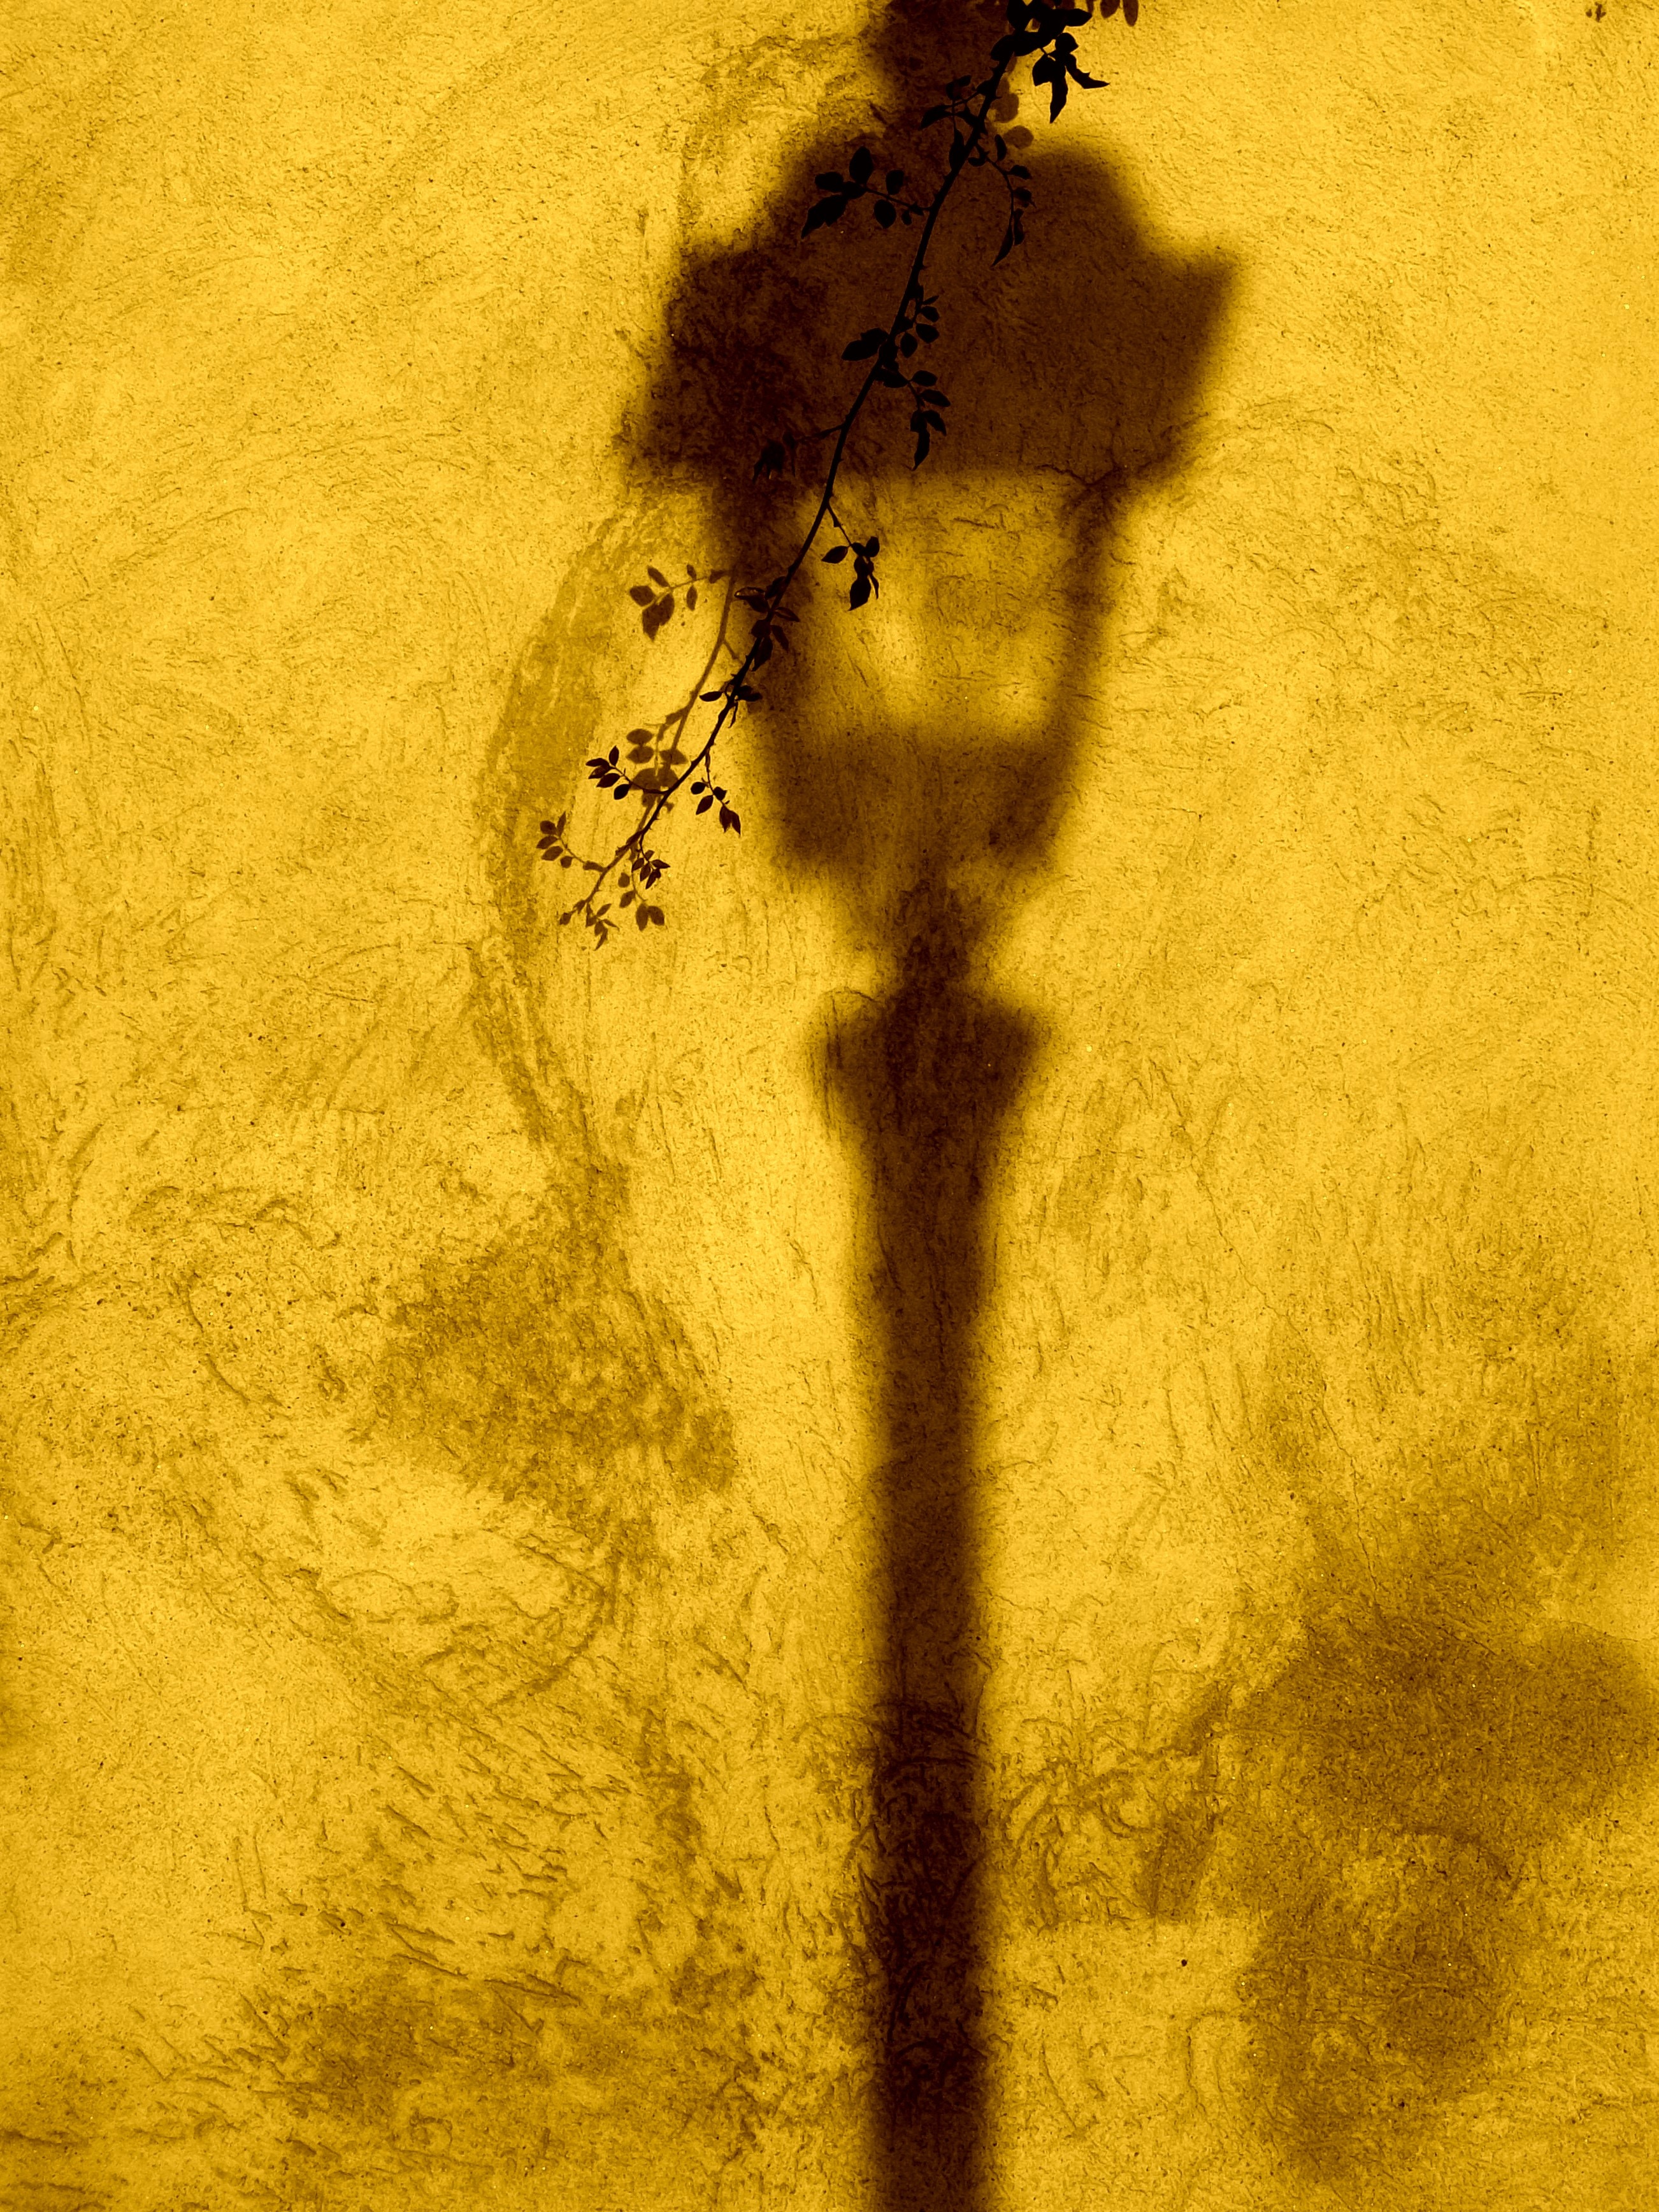 android lantern, lamp, yellow, texture, textures, branch, shadow, wall